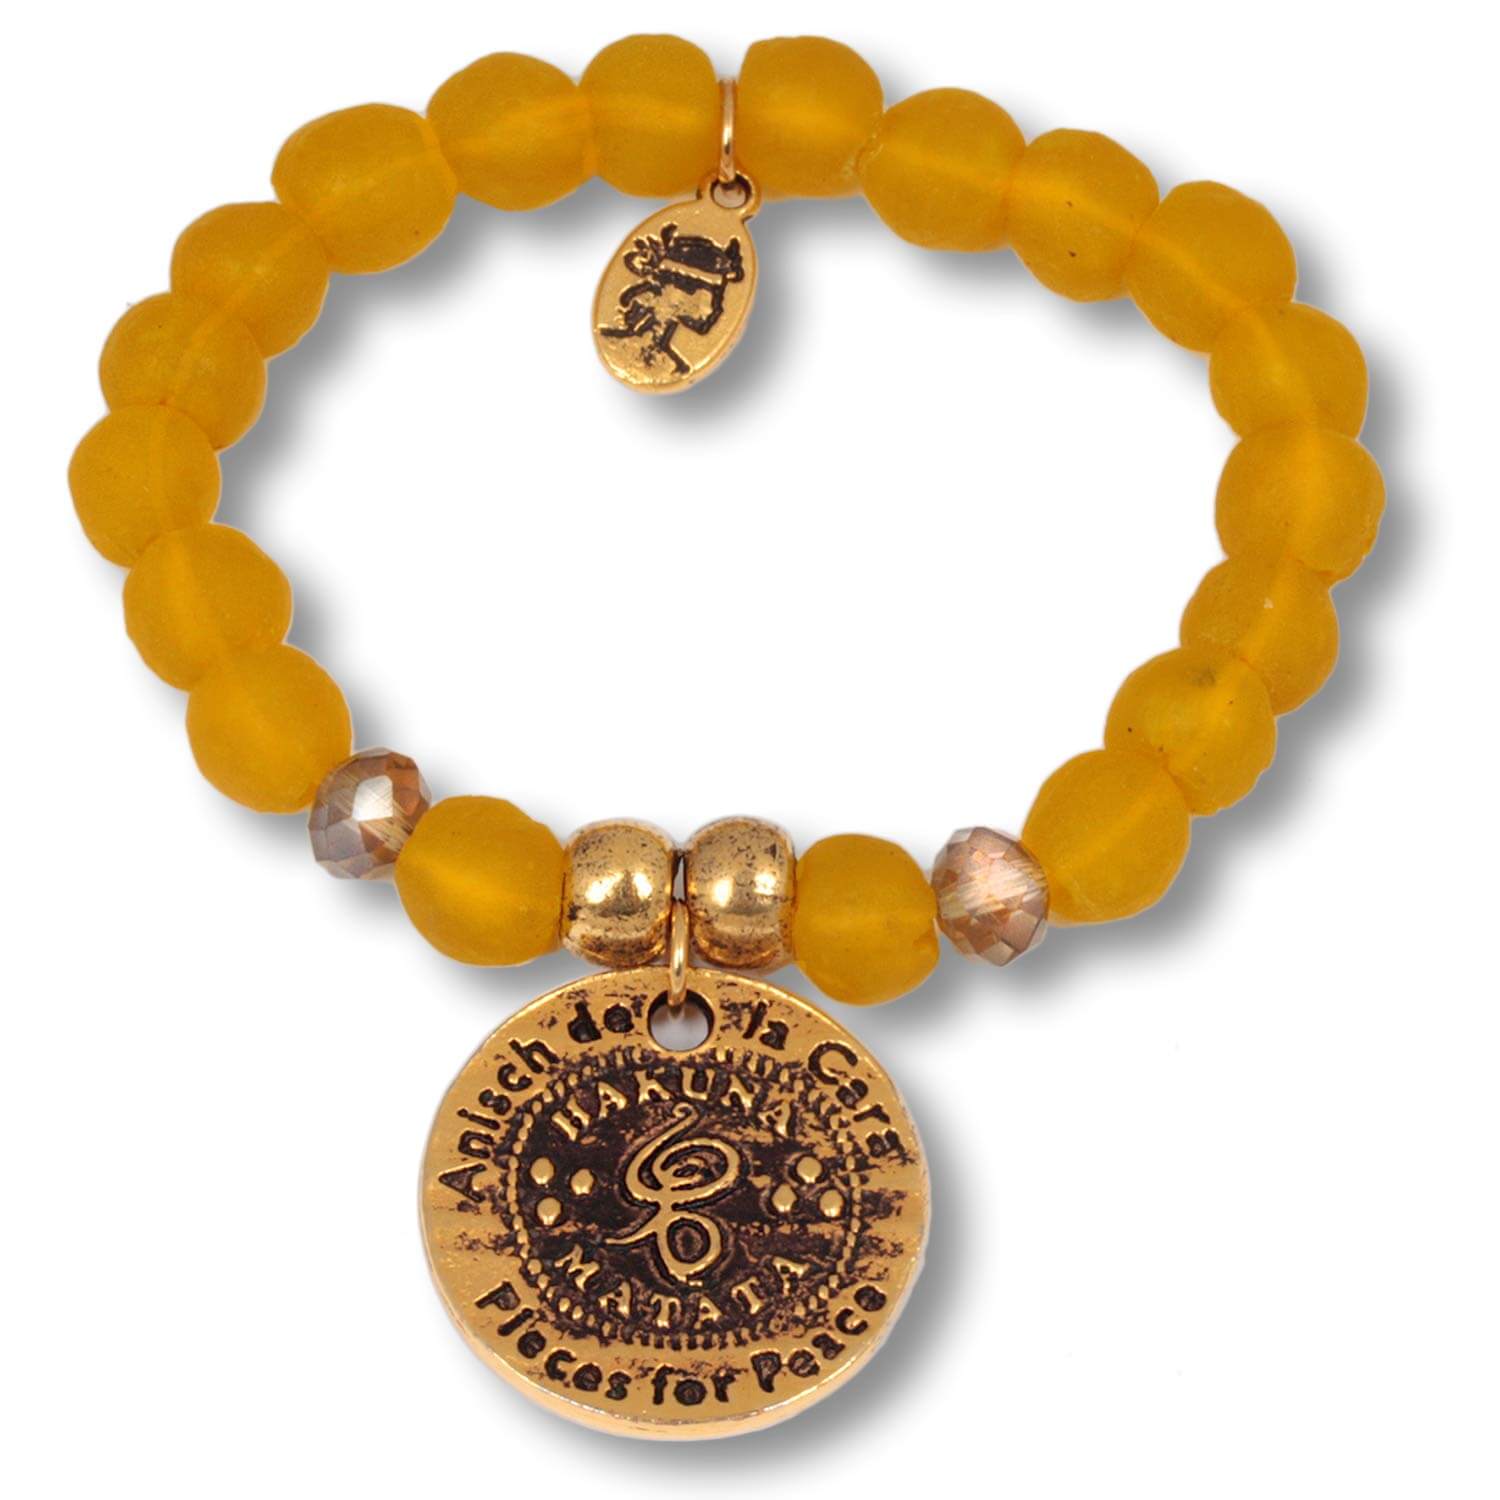 Sun Gold Hakuna Matata Beads - coin bracelet made of recycled glass beads